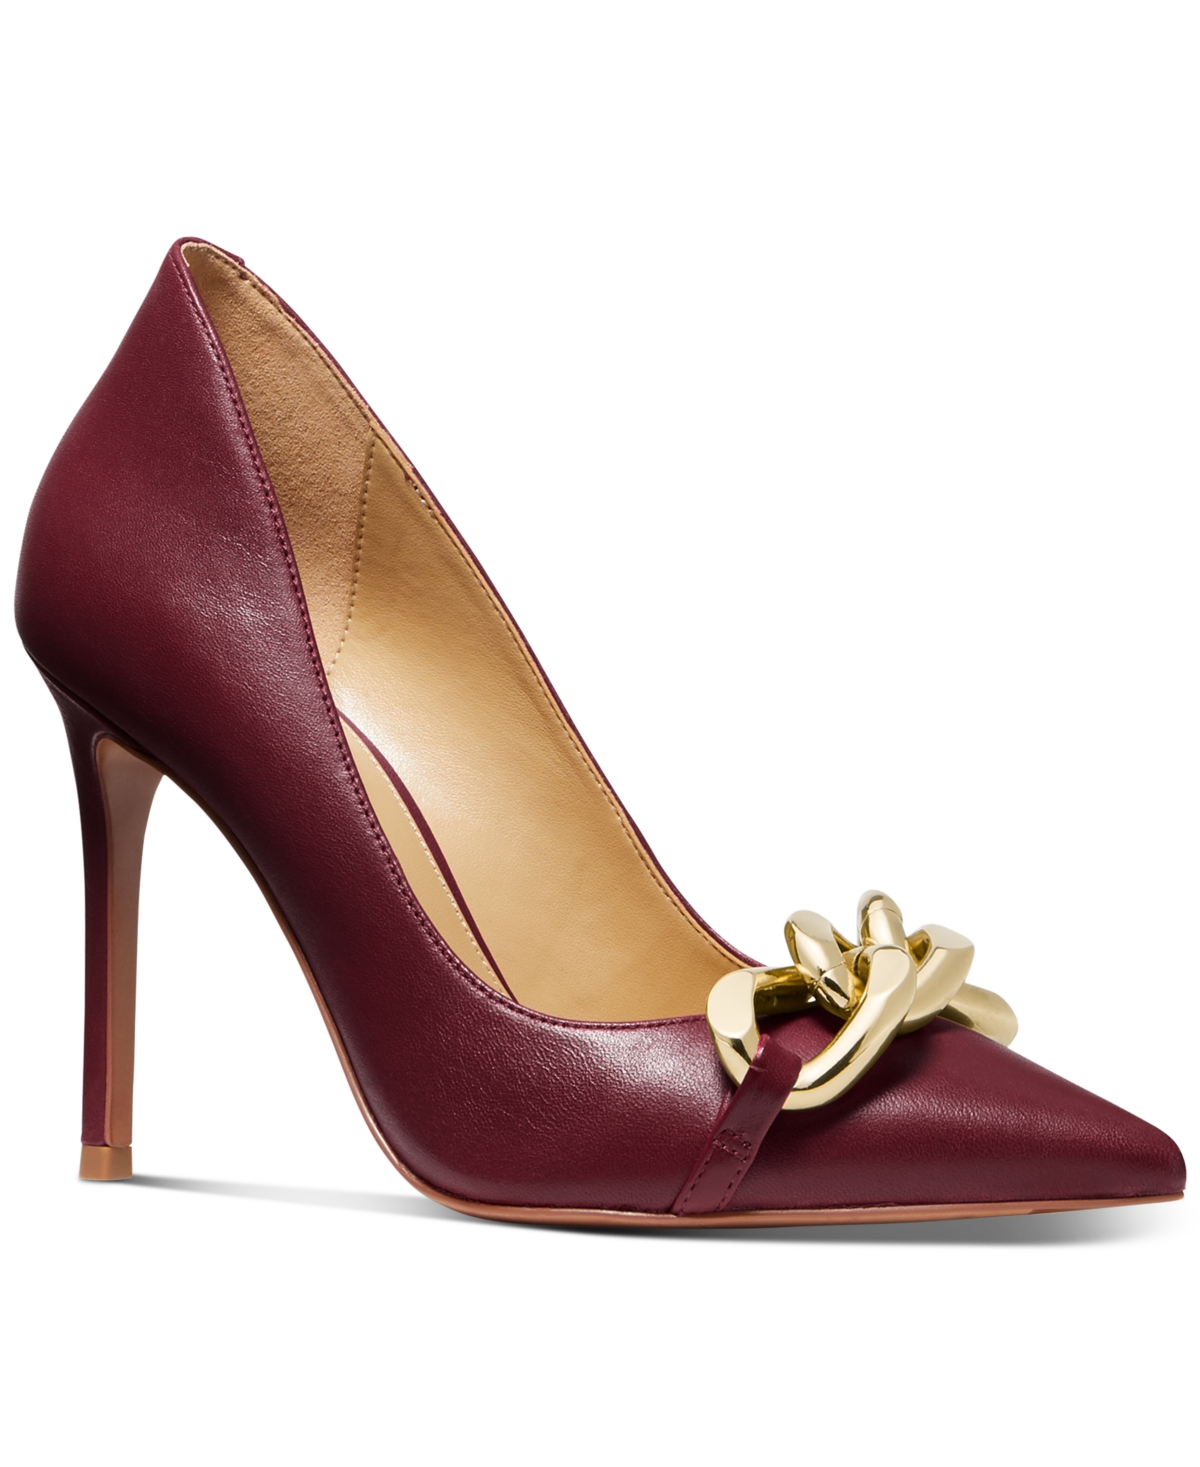 UPC 195512620935 product image for Michael Michael Kors Women's Scarlett Pointed-Toe Chain Pumps Women's Shoes | upcitemdb.com